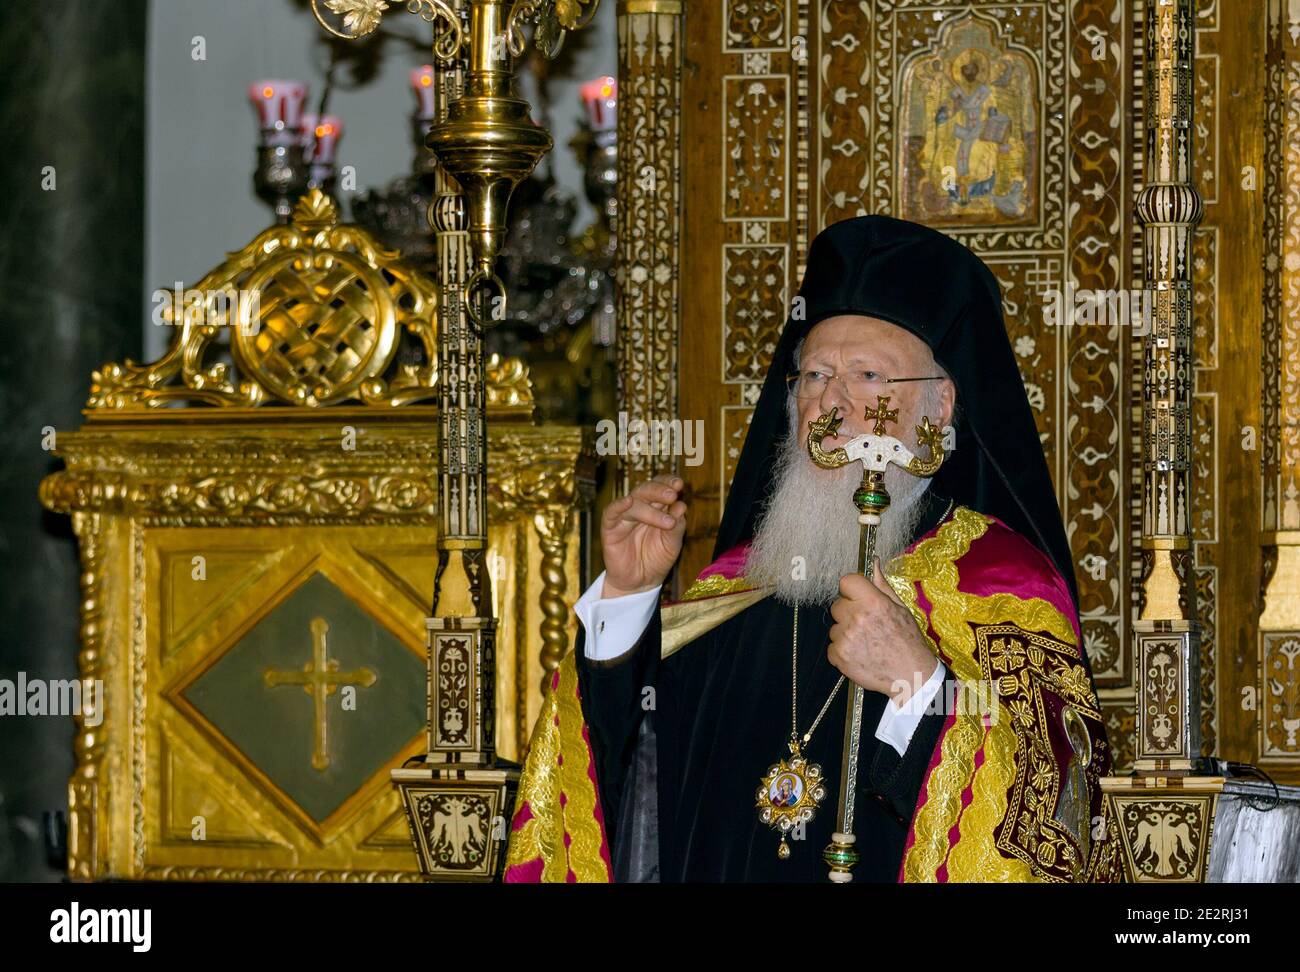 Patriarch Bartholomew I, attends the liturgy in the Patriarchal Church of St. George on December 30, 2012 in Istanbul, Turkey. Stock Photo